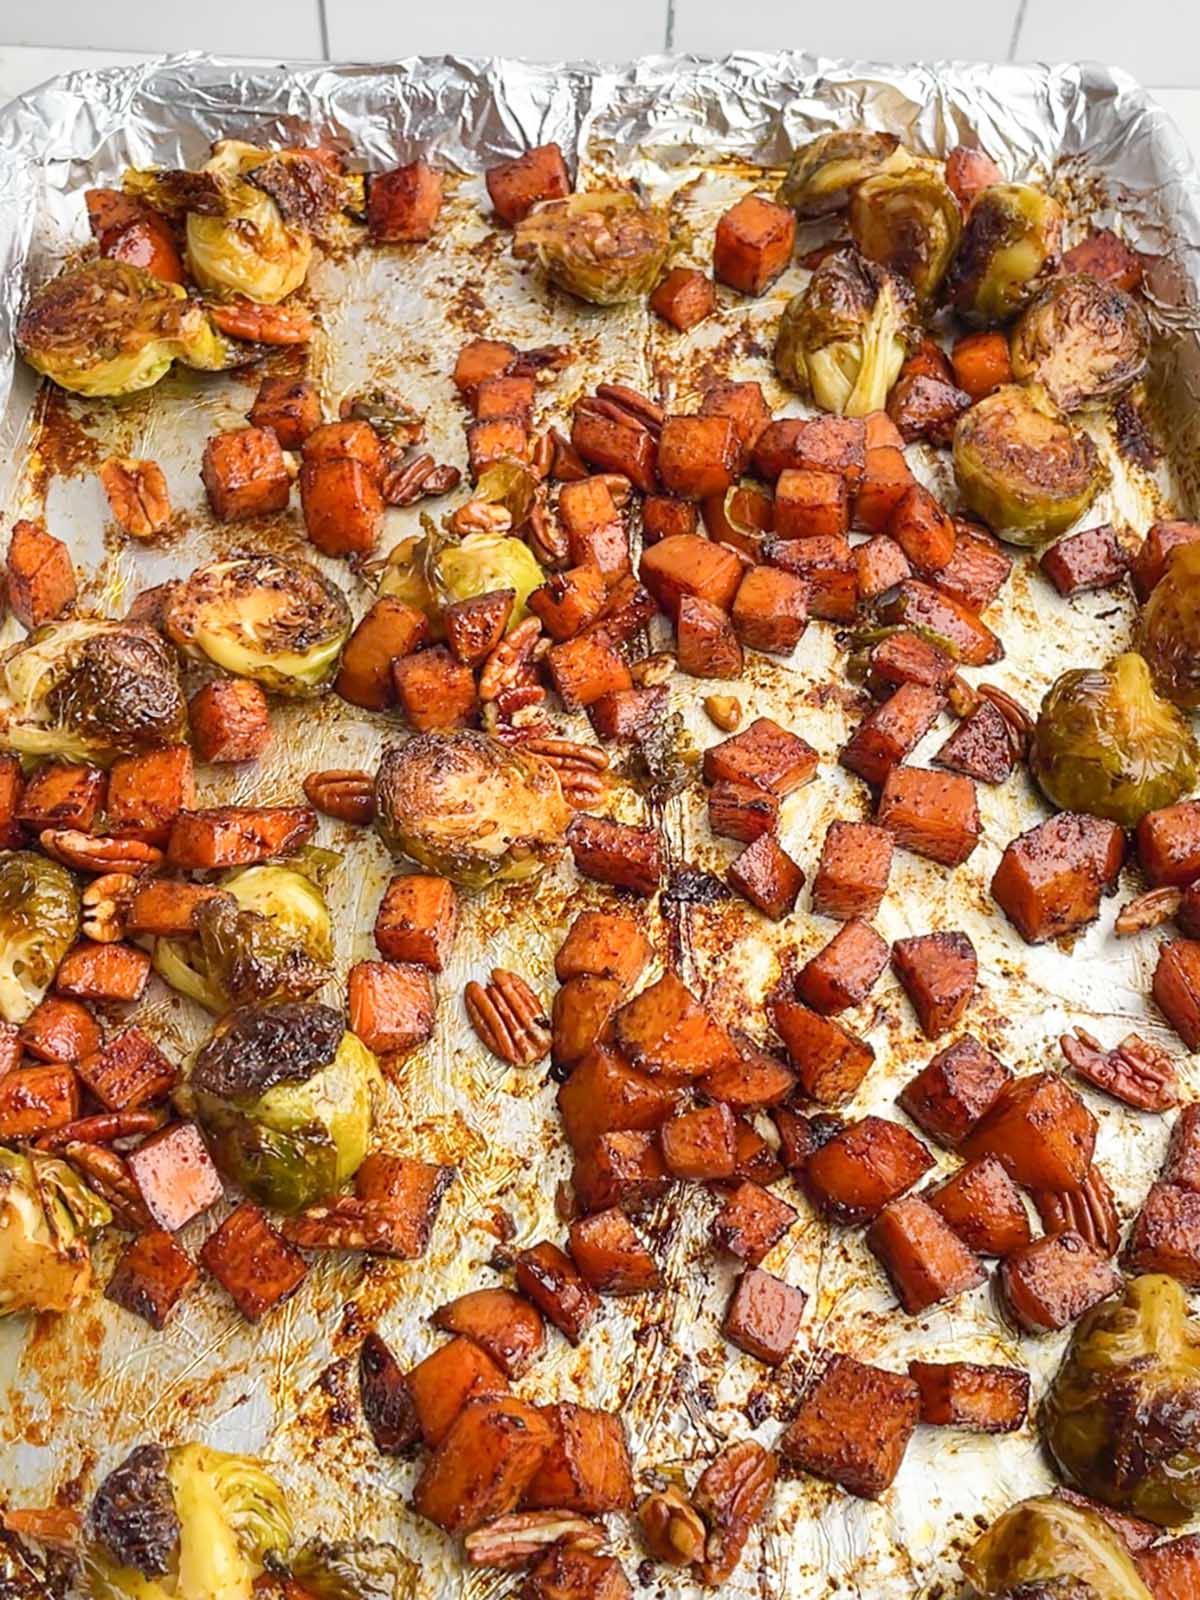 roasted brussels sprouts and sweet potatoes on baking sheet